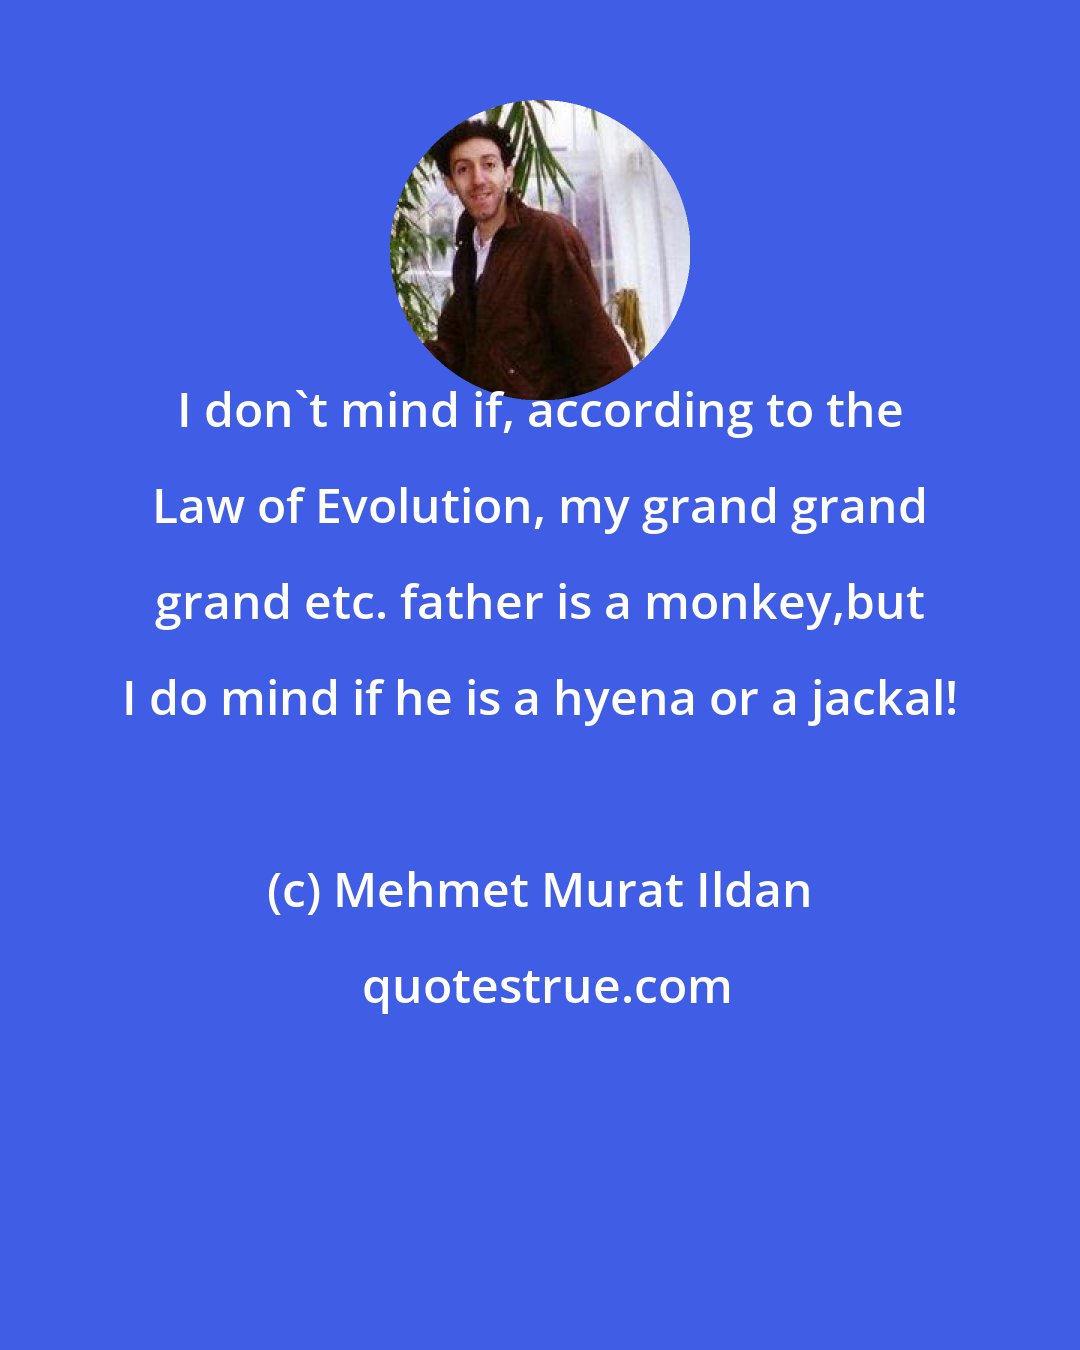 Mehmet Murat Ildan: I don't mind if, according to the Law of Evolution, my grand grand grand etc. father is a monkey,but I do mind if he is a hyena or a jackal!